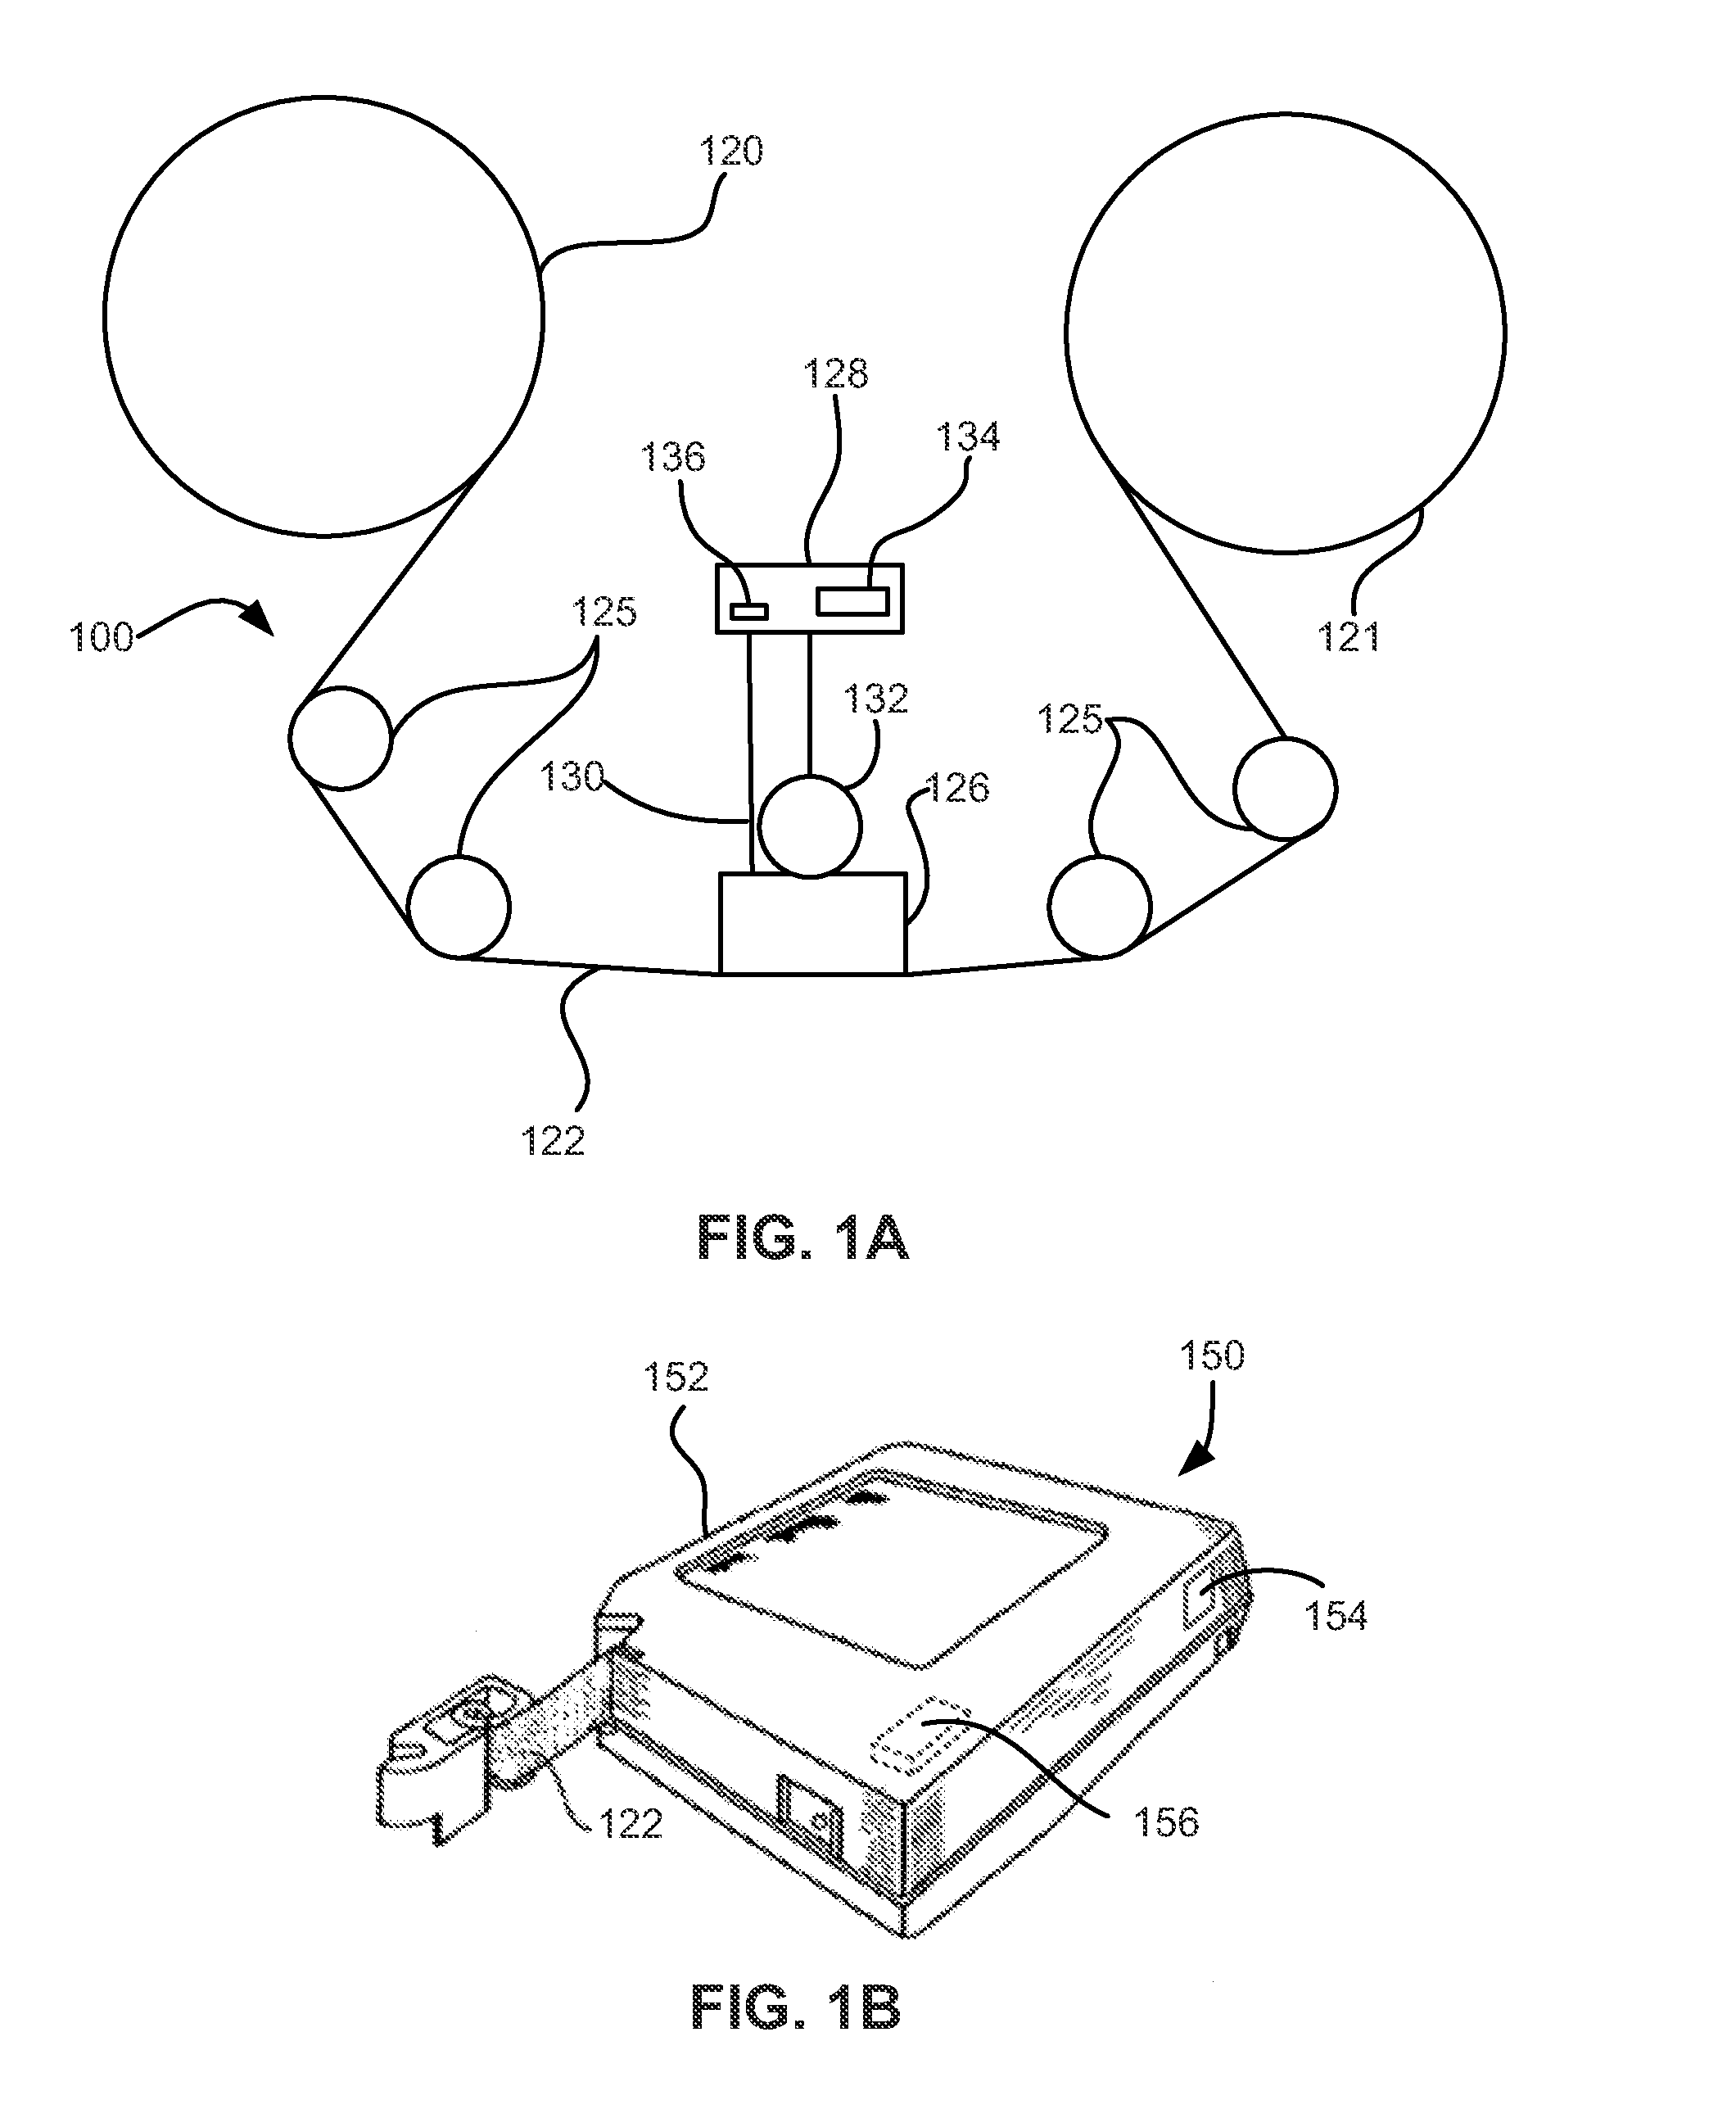 High density timing based servo format for use with tilted transducer arrays